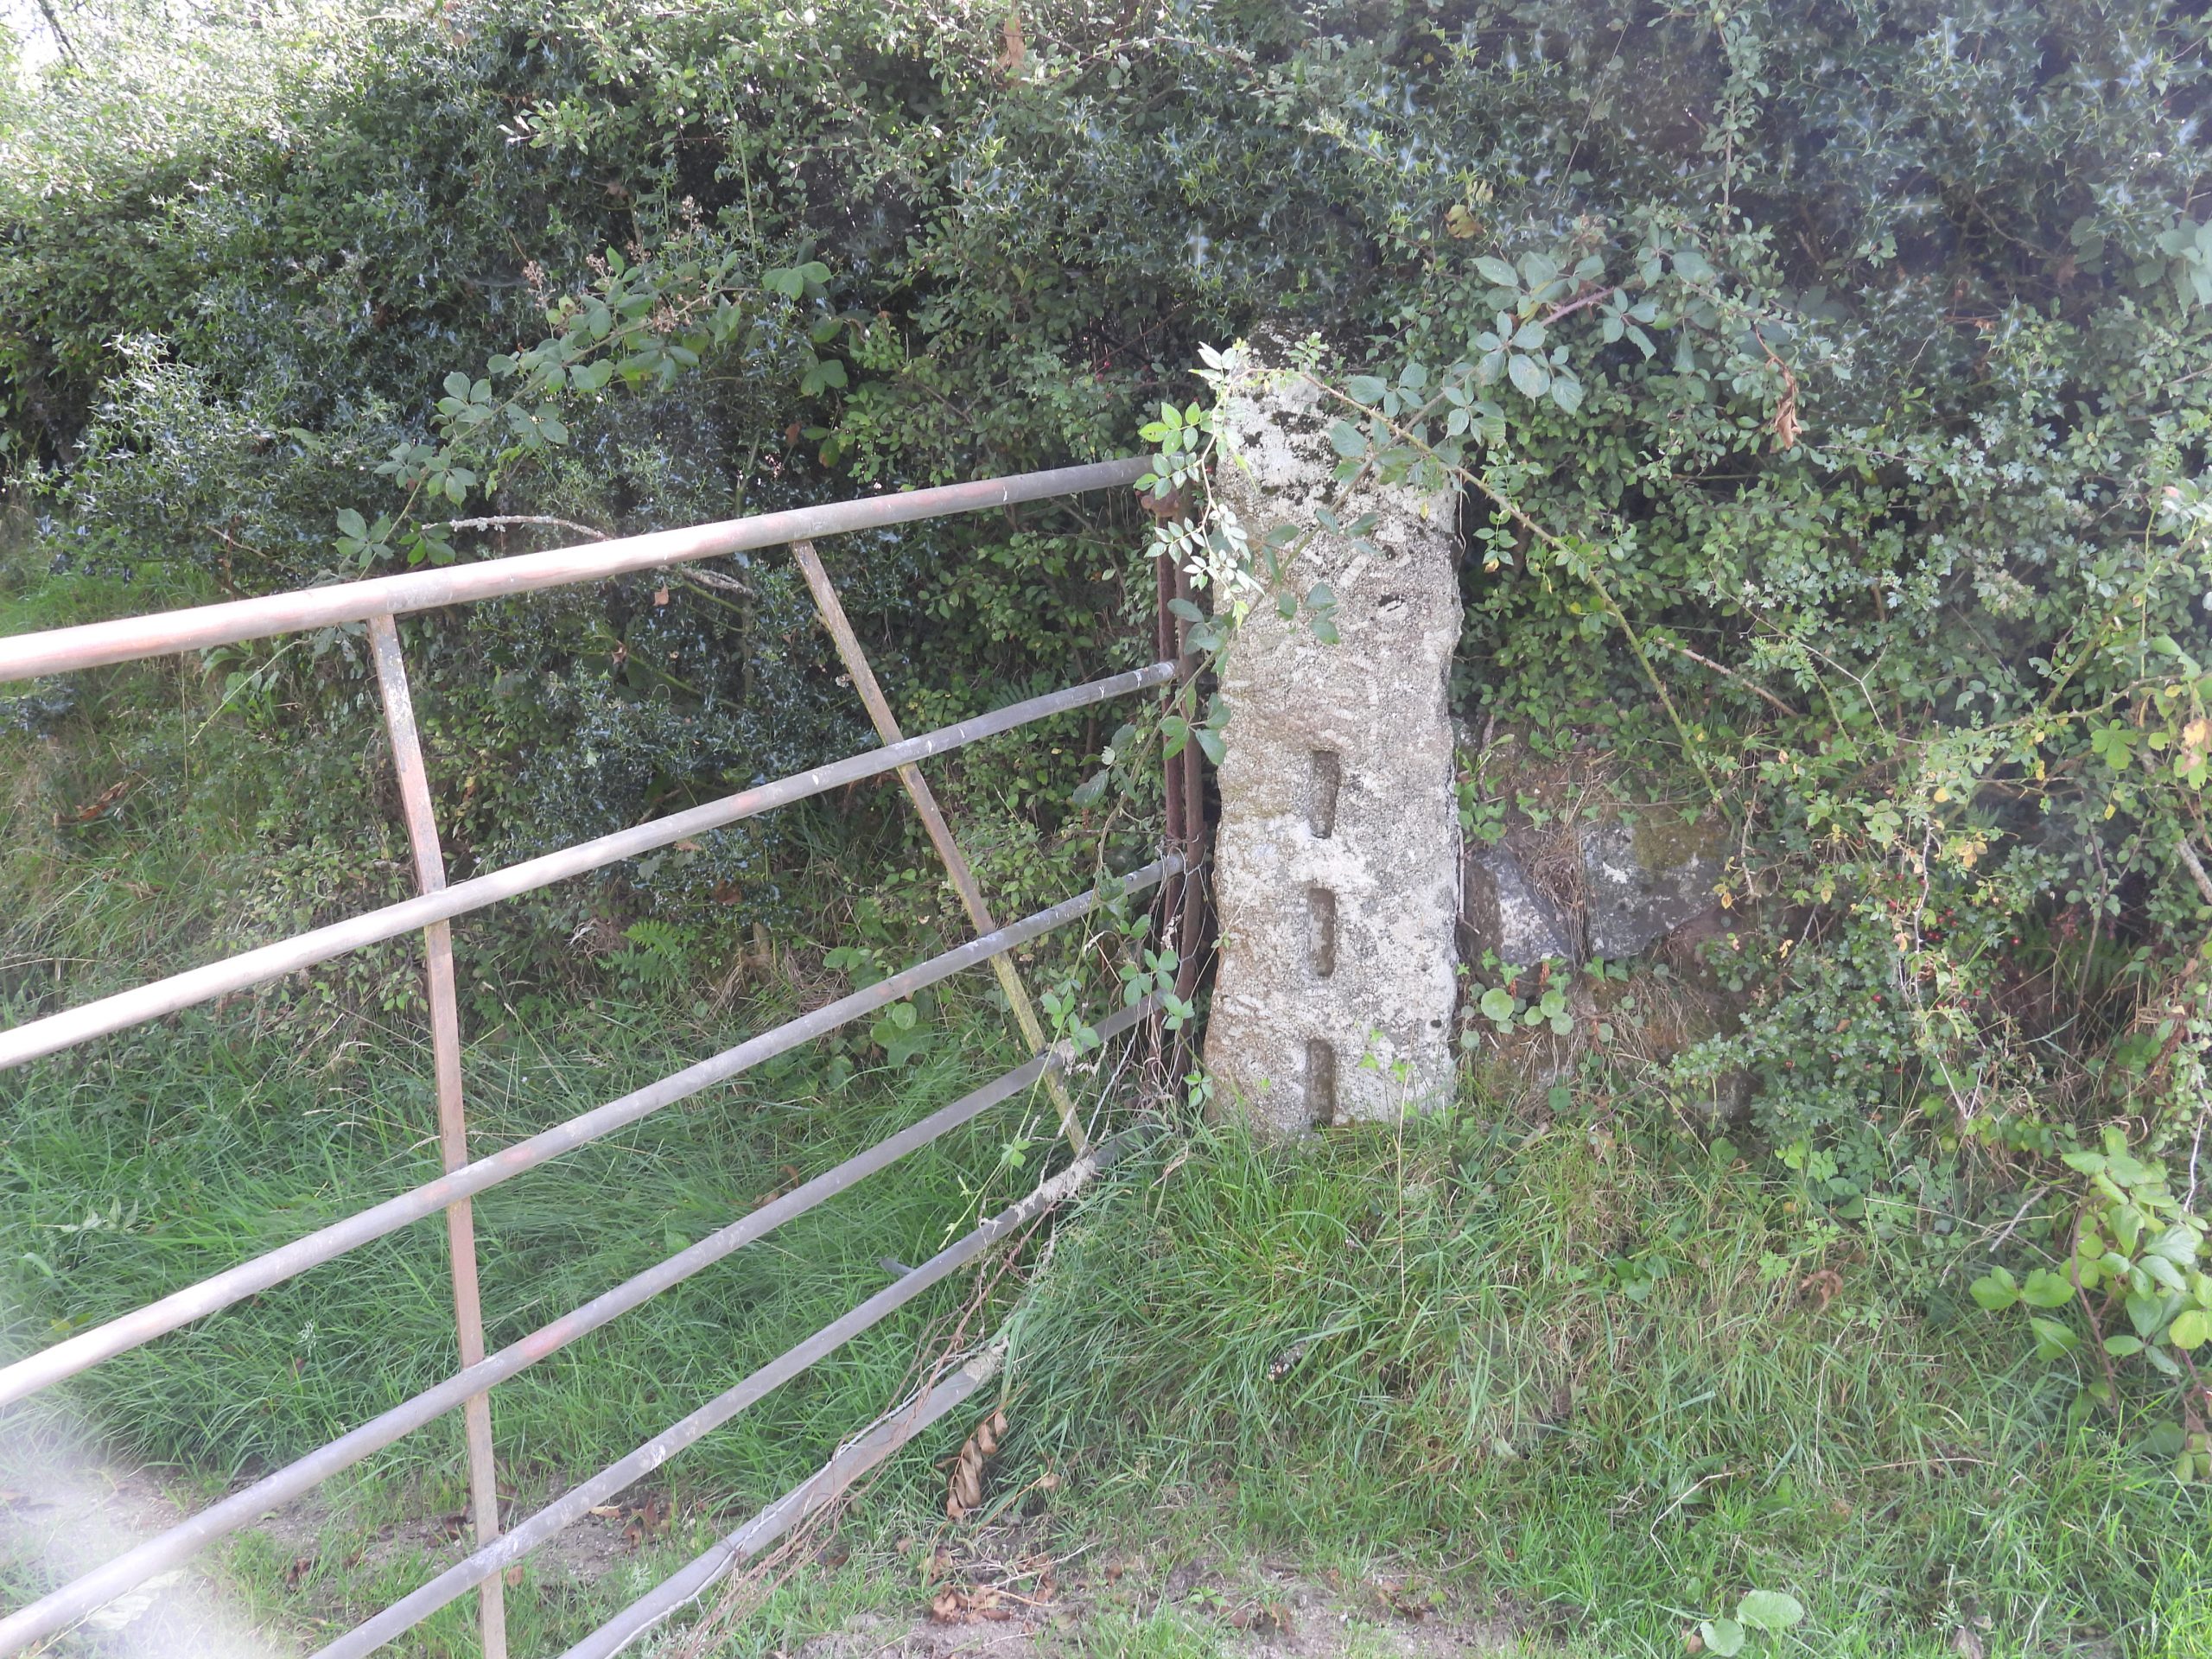 15. Slotted Gatepost